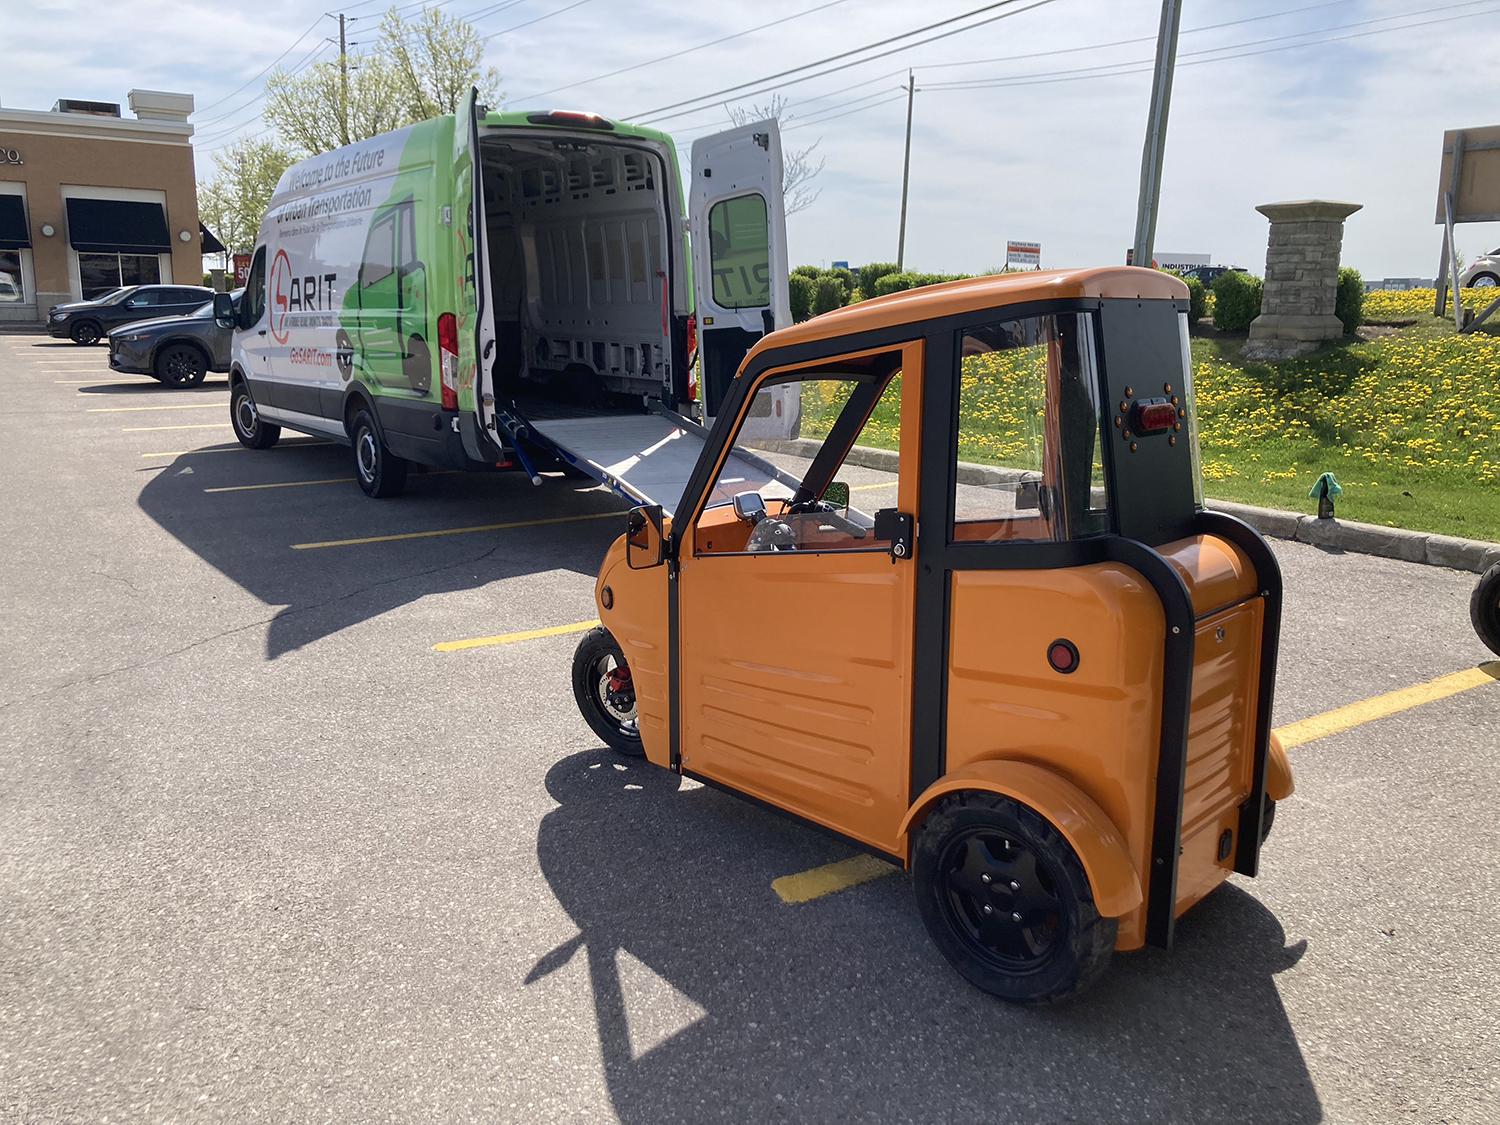 Two Sarit micro EVs can fit into a conventional van for transportation. Neil Vorano / The Charge